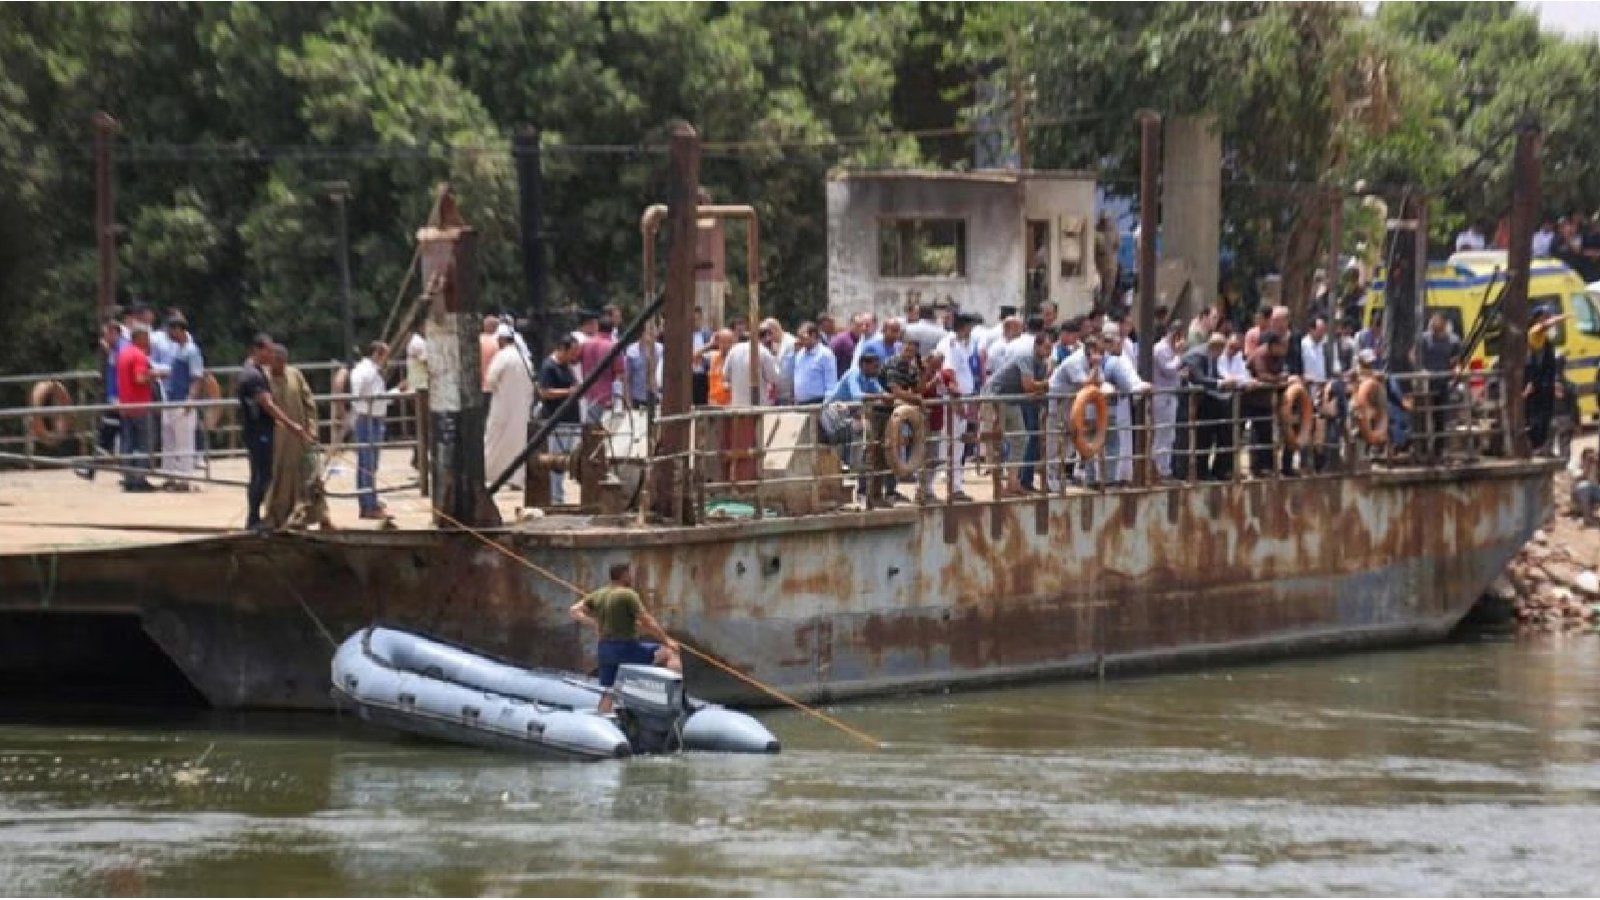 Relatives wait on the bank of a canal of the Nile River as rescuers search the waterway for casualties after a minibus sank near Abu Ghalib village in Egypt's Giza governorate. Photo: AFP